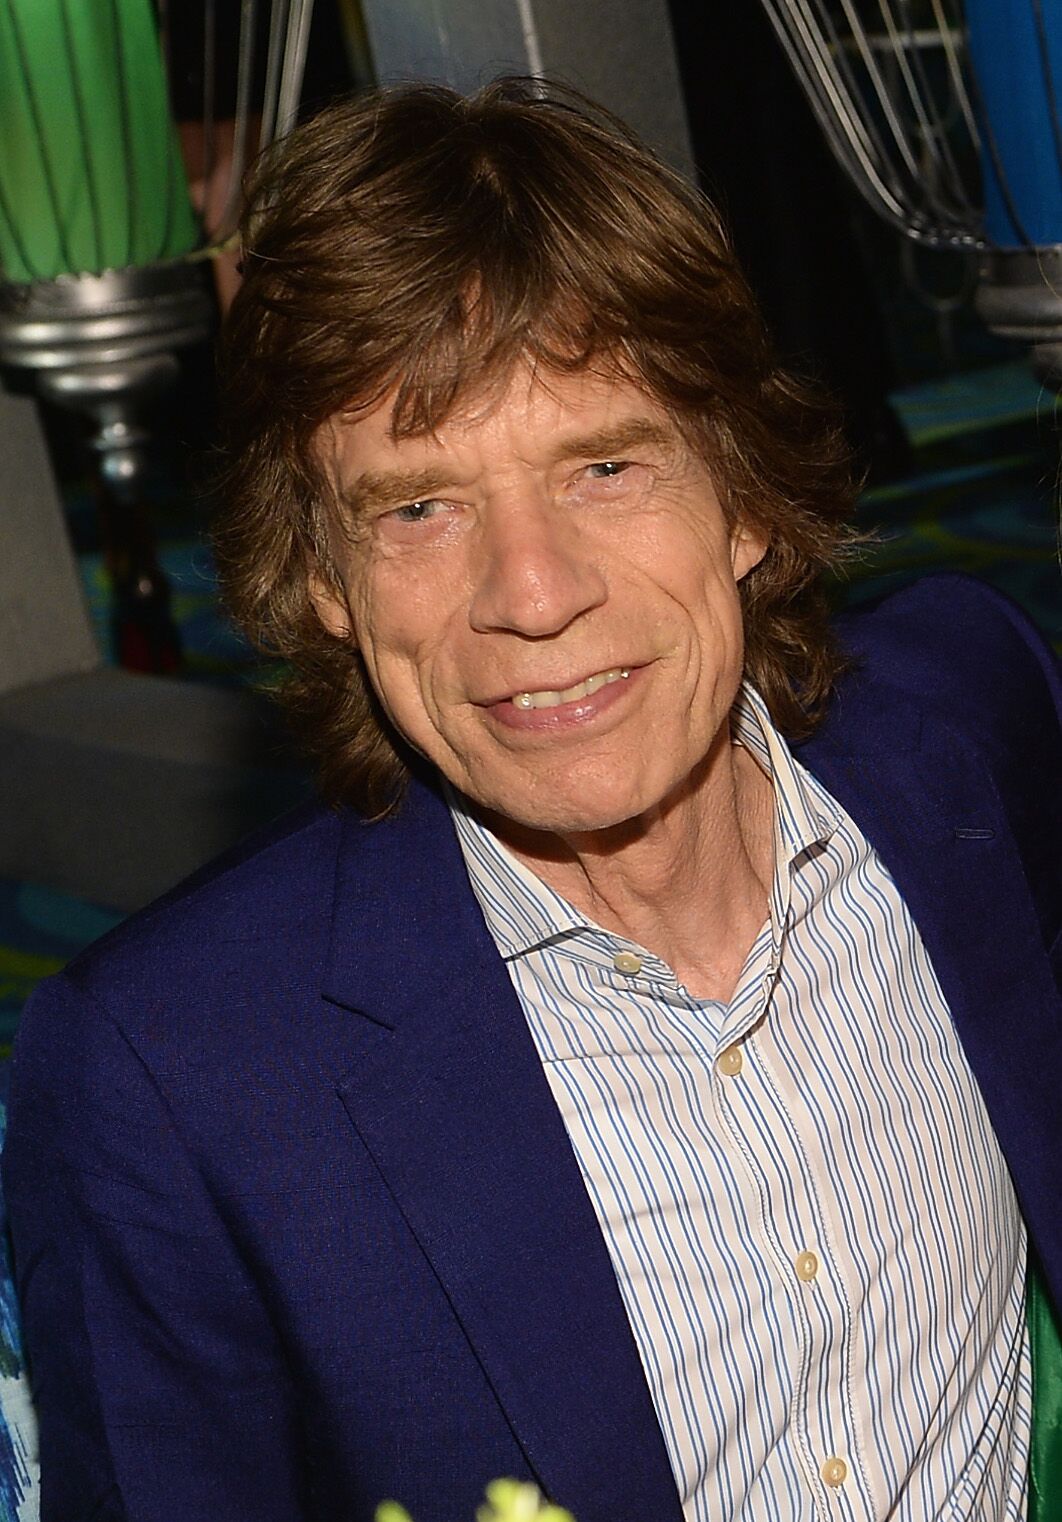  Mick Jagger attends HBO's Annual Primetime Emmy Awards Post Award Reception at The Plaza at the Pacific Design Center on September 22, 2013 in Los Angeles, California | Photo: Getty Images